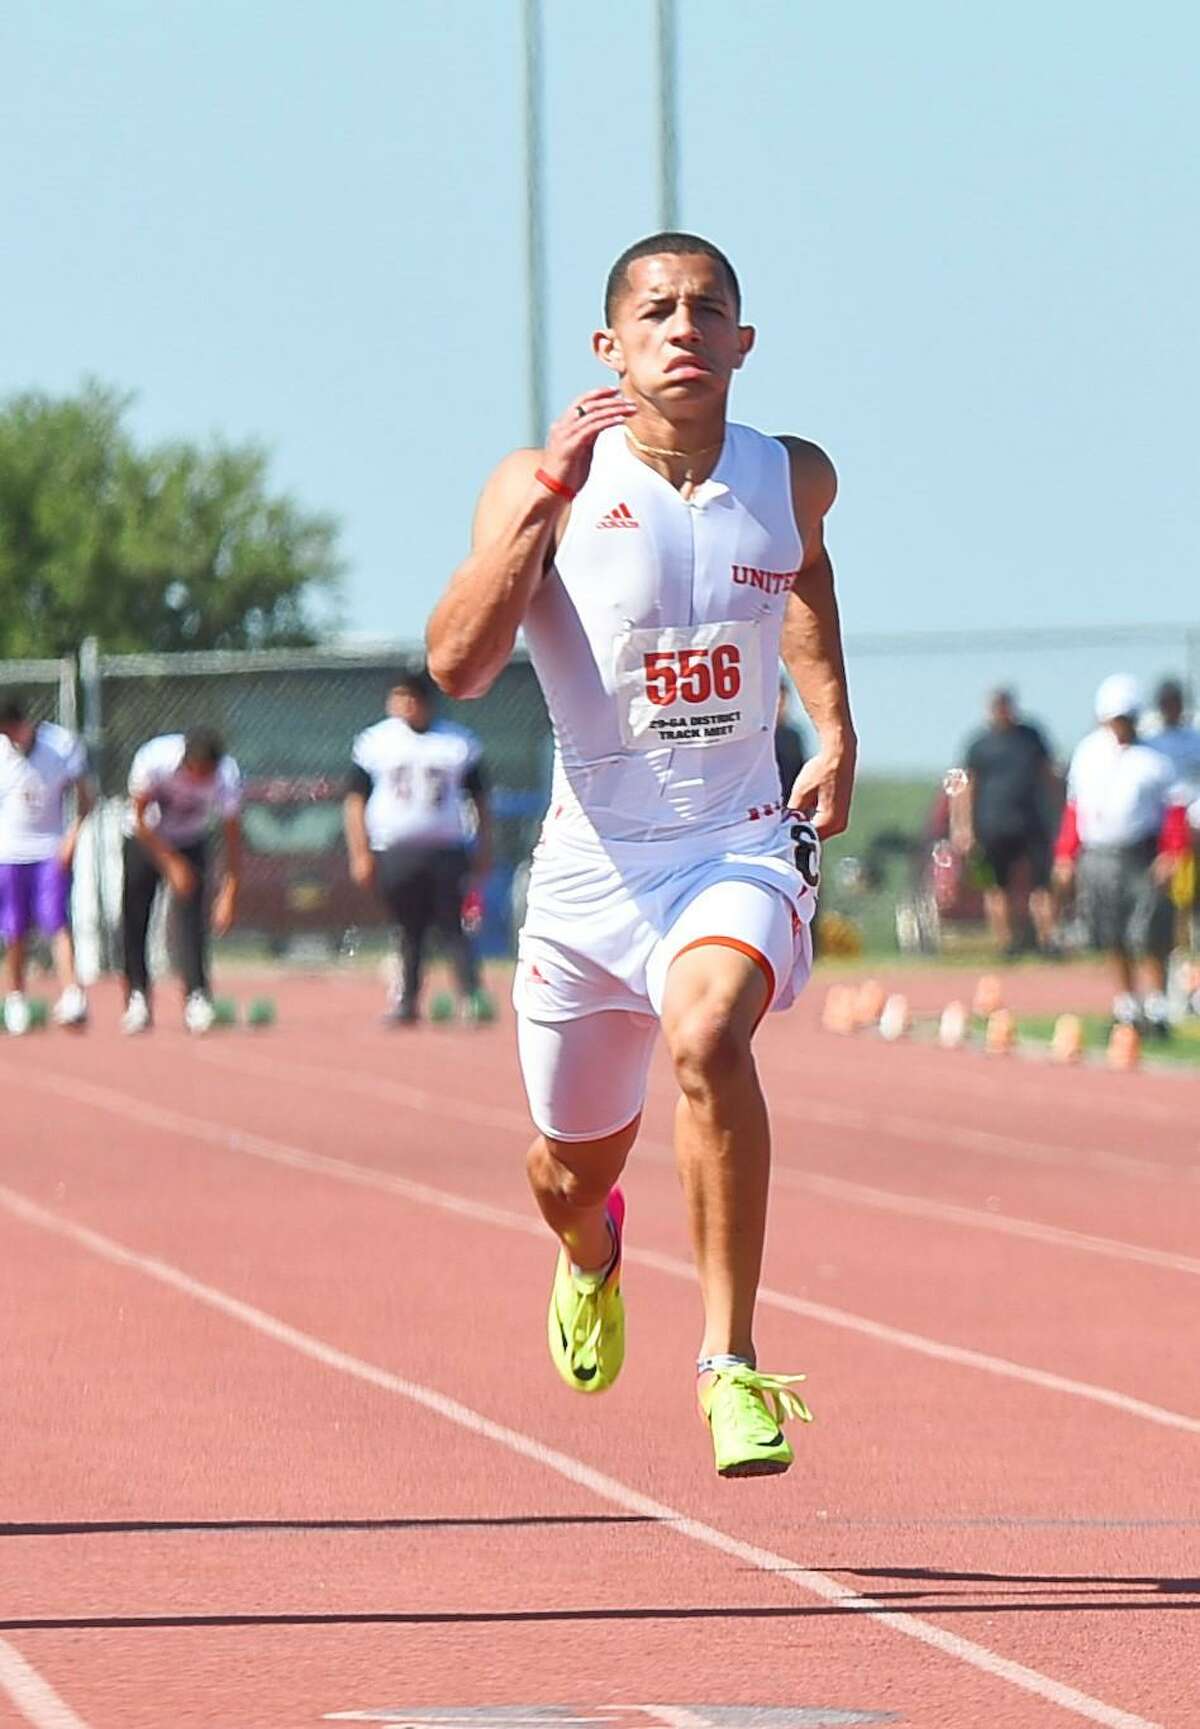 Alex Tirado placed 26th in the 100-meter dash and 30th in the 200-meter dash at the 27th New Balance Outdoor Nationals.